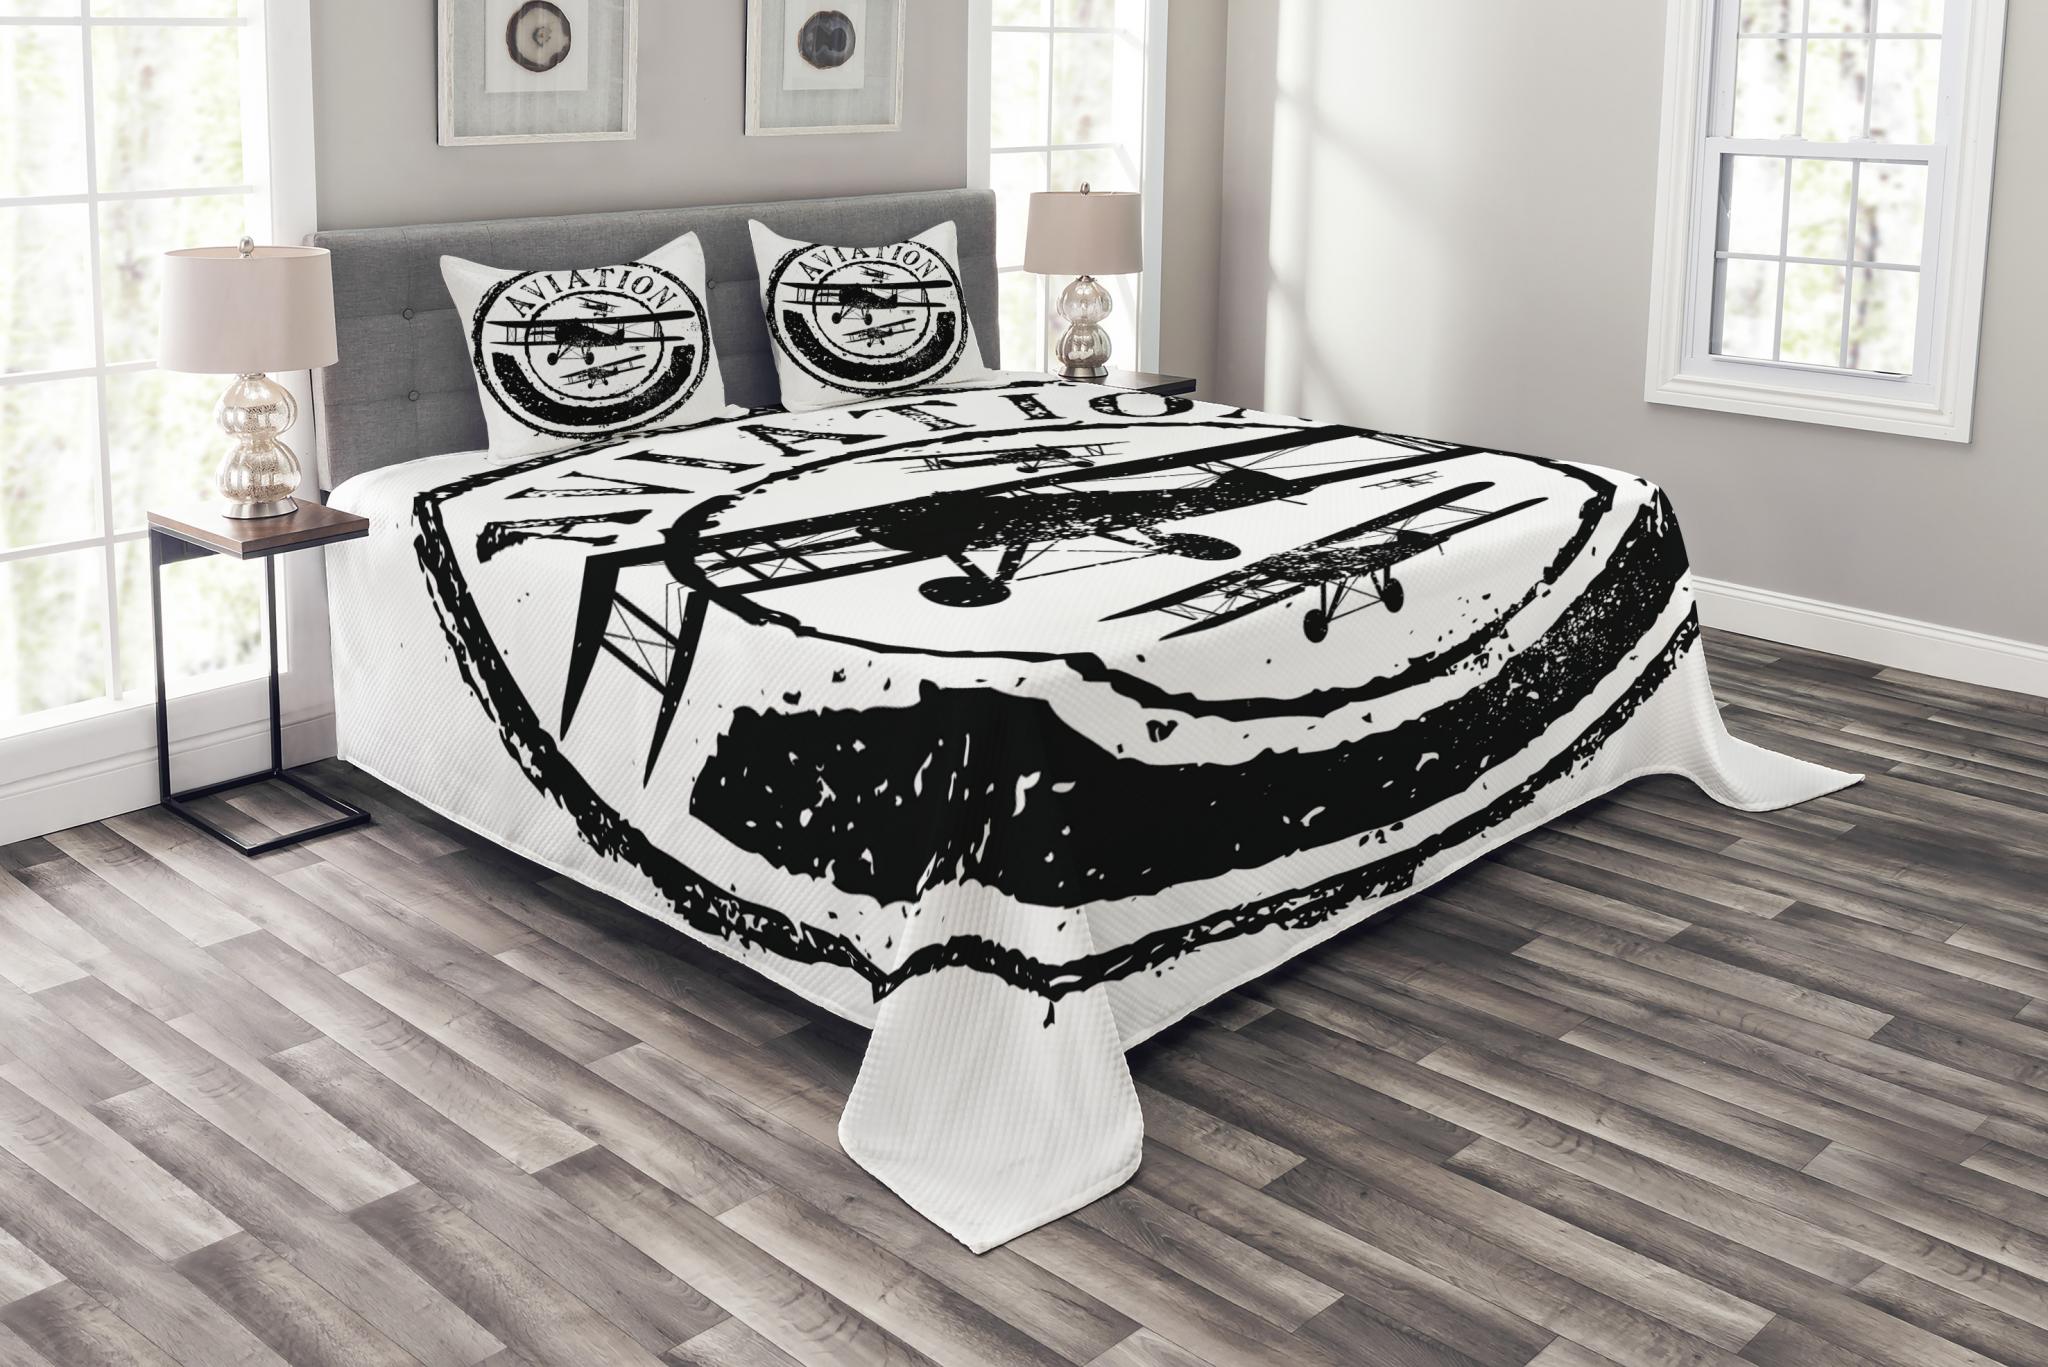 Black and White Twin Size Grunge Style Stamp Design with Word Aviation and Airplane Silhouettes Decorative 2 Piece Bedding Set with 1 Pillow Sham Ambesonne Vintage Airplane Duvet Cover Set